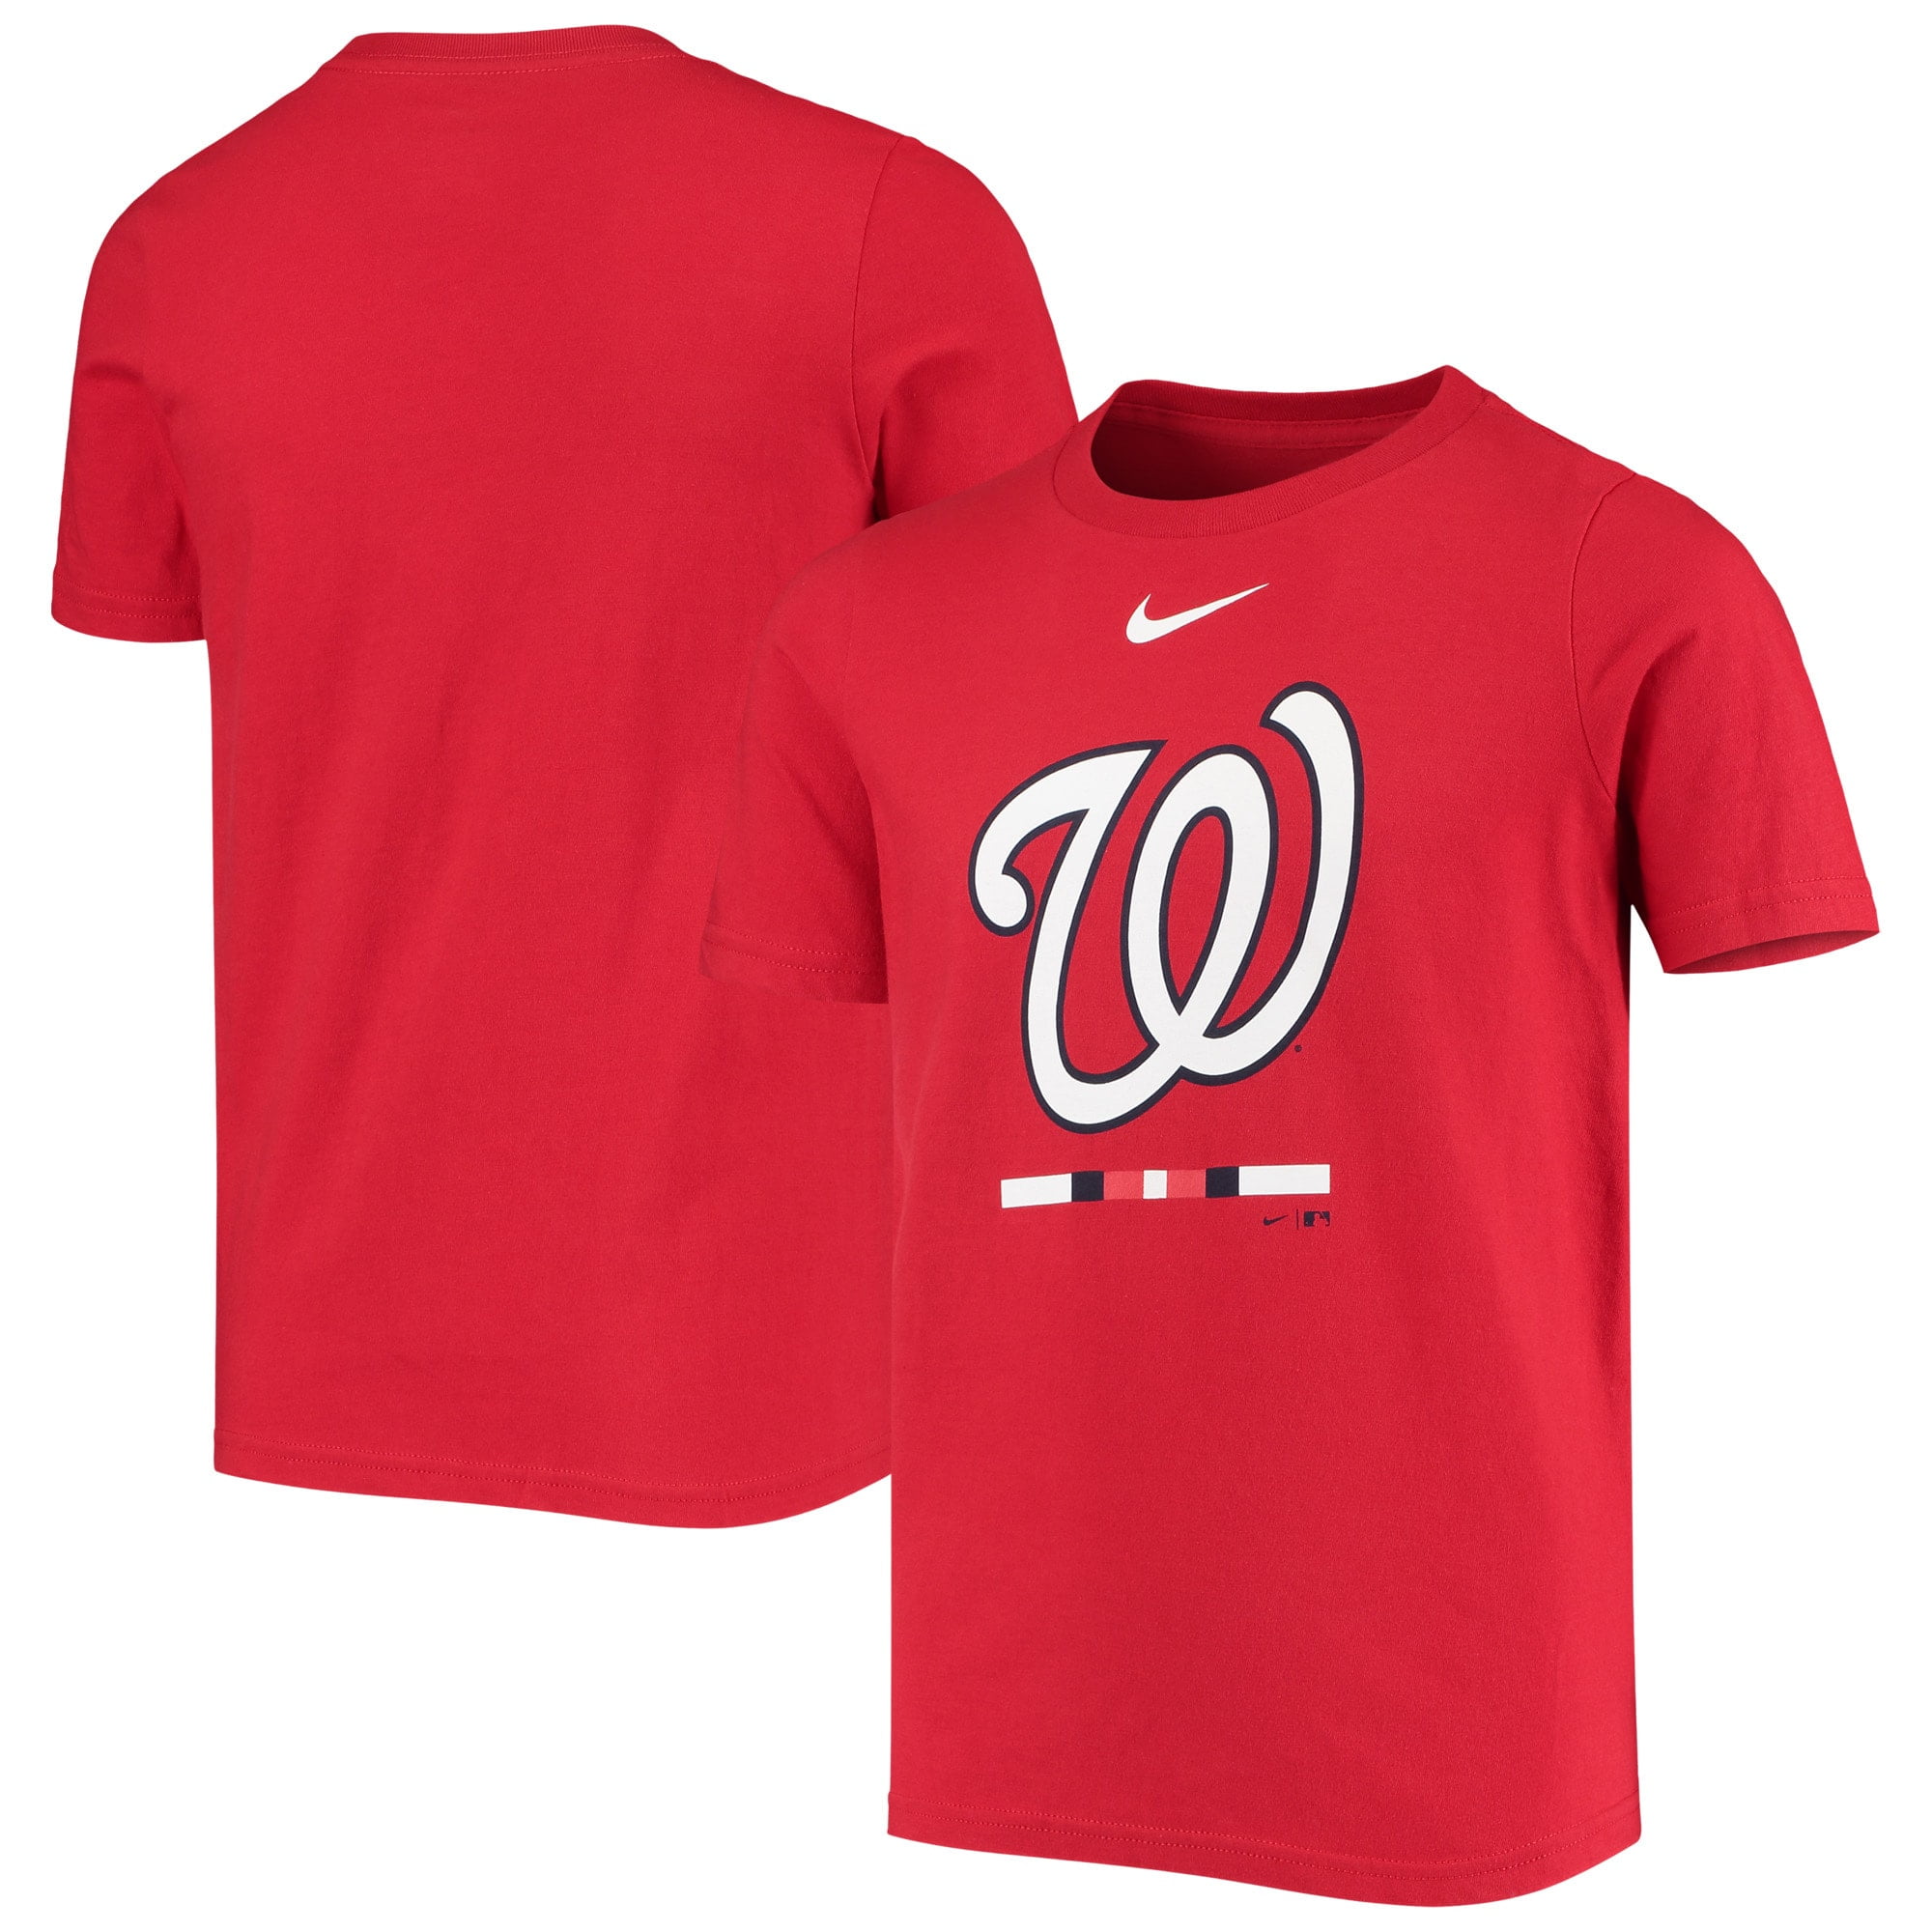 nationals youth jersey